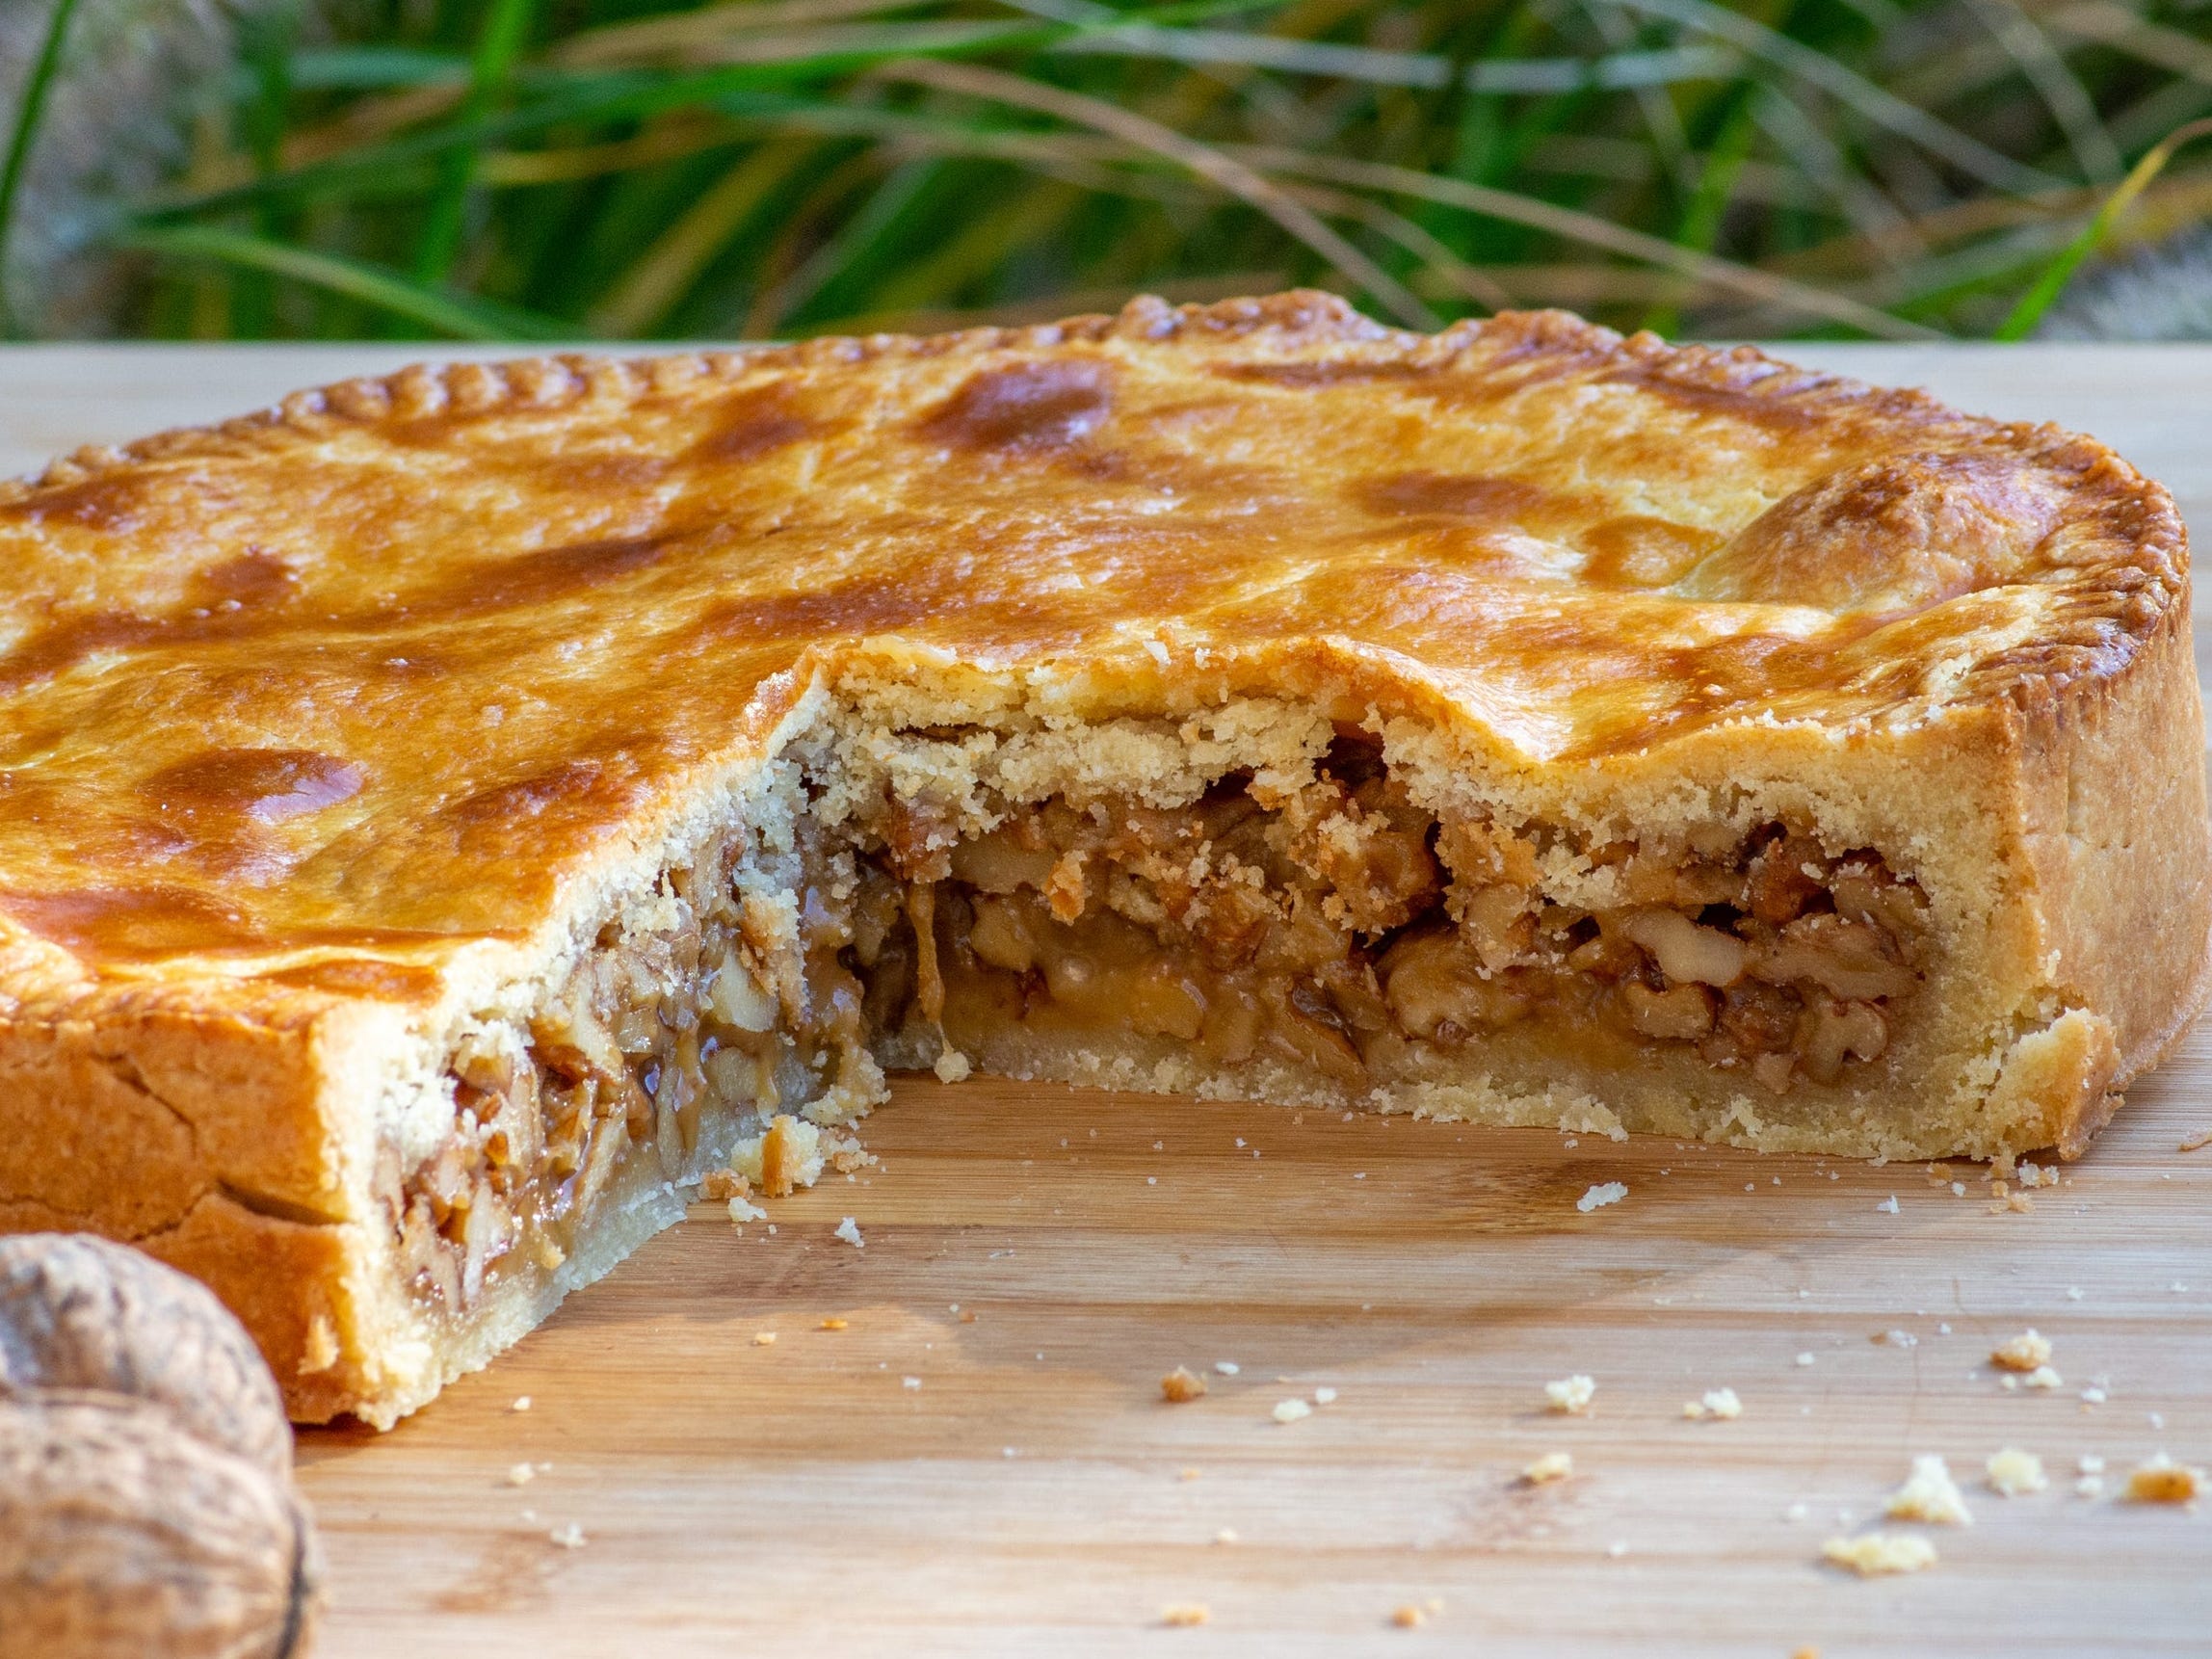 <p><a href="https://www.tasteatlas.com/bundner-nusstorte/recipe">According to Taste Atlas</a>, this German pastry is made with caramelized walnuts and cream. </p><p>Although some trace this pie's origins to the canton of Graubünden, <a href="https://www.insider.com/best-pumpkin-pie-i-ever-made-recipe-bobby-flay-2021-10">the dessert</a> was actually brought to the region from the south where the walnut grows, according to the <a href="https://www.graubuenden.ch/en/experience-graubunden/culinary-arts/recipe-graubunden-nut-pie" rel="noopener">official tourism website for Graubünden</a>.</p>